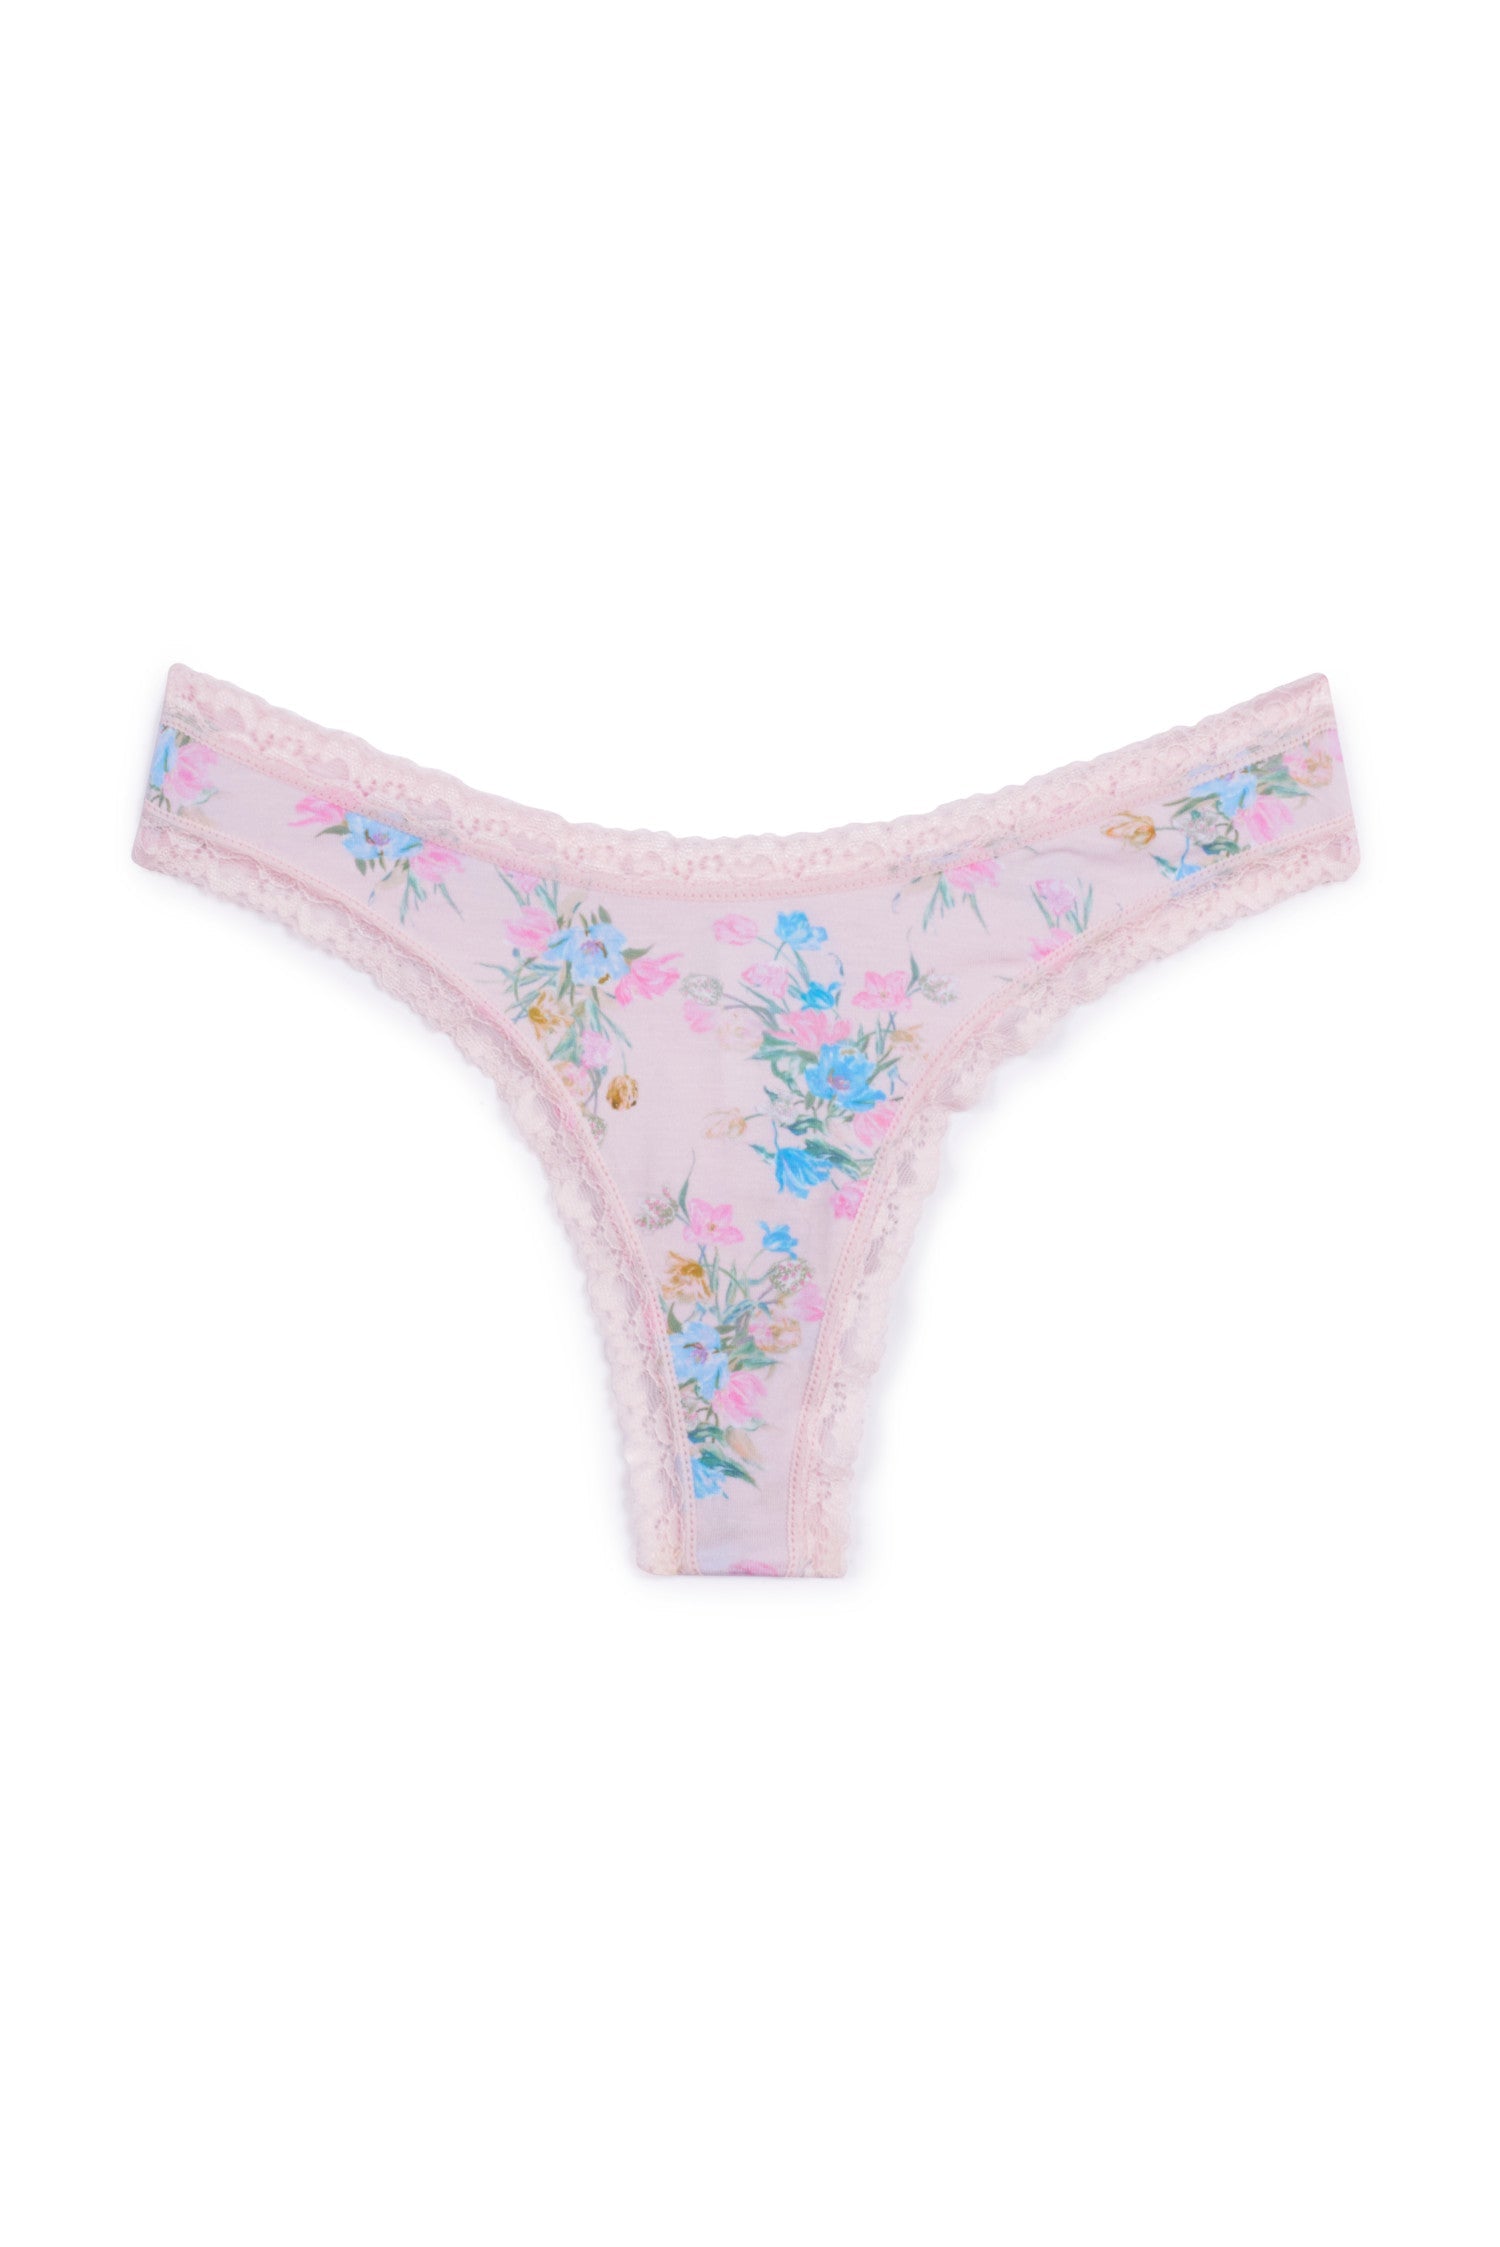 Womens sustainable multi floral lace knicker underwear thong box set